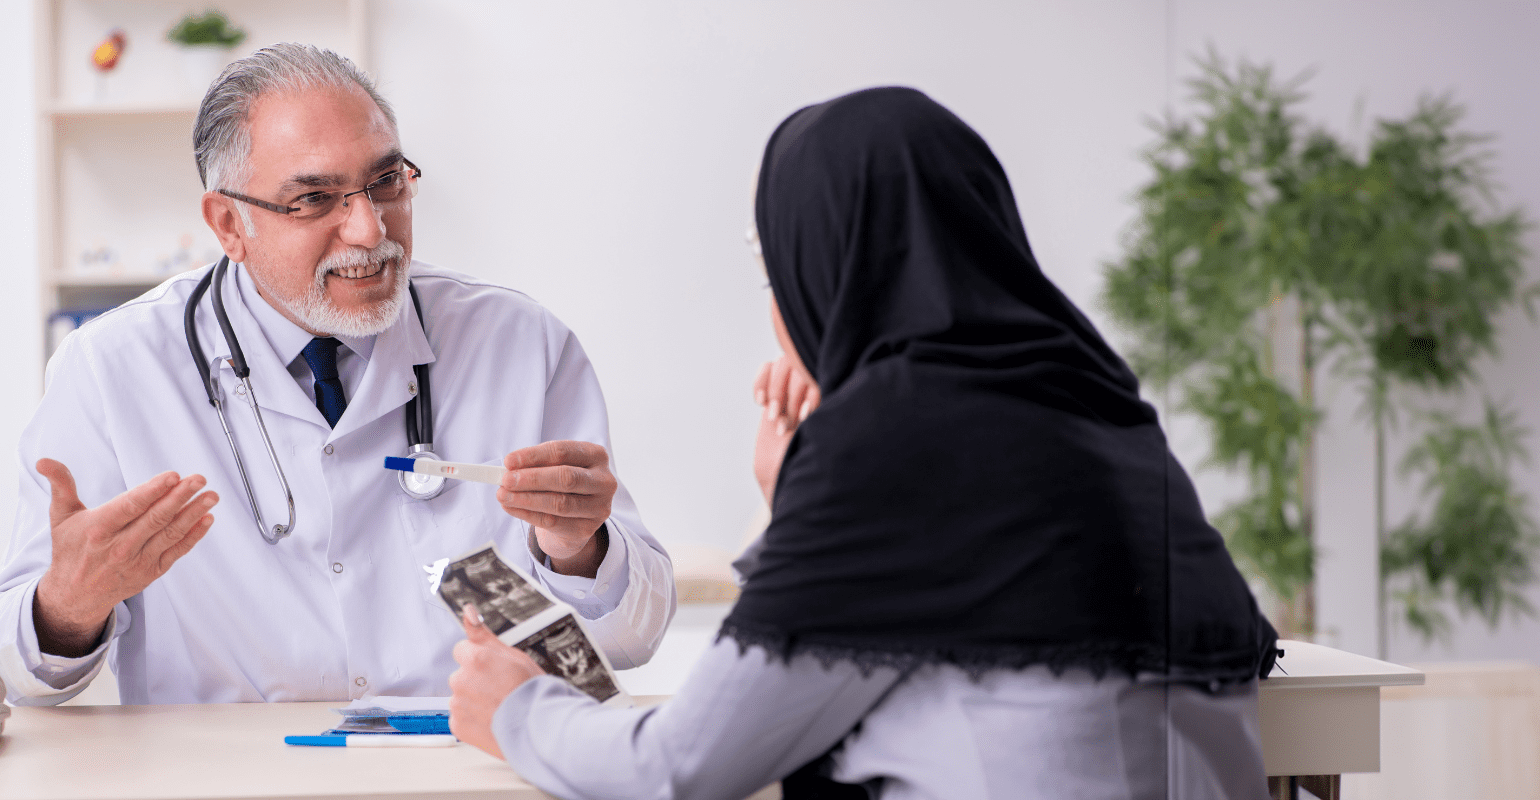 Opportunities, challenges, and the path to healthcare transformation in Saudi Arabia